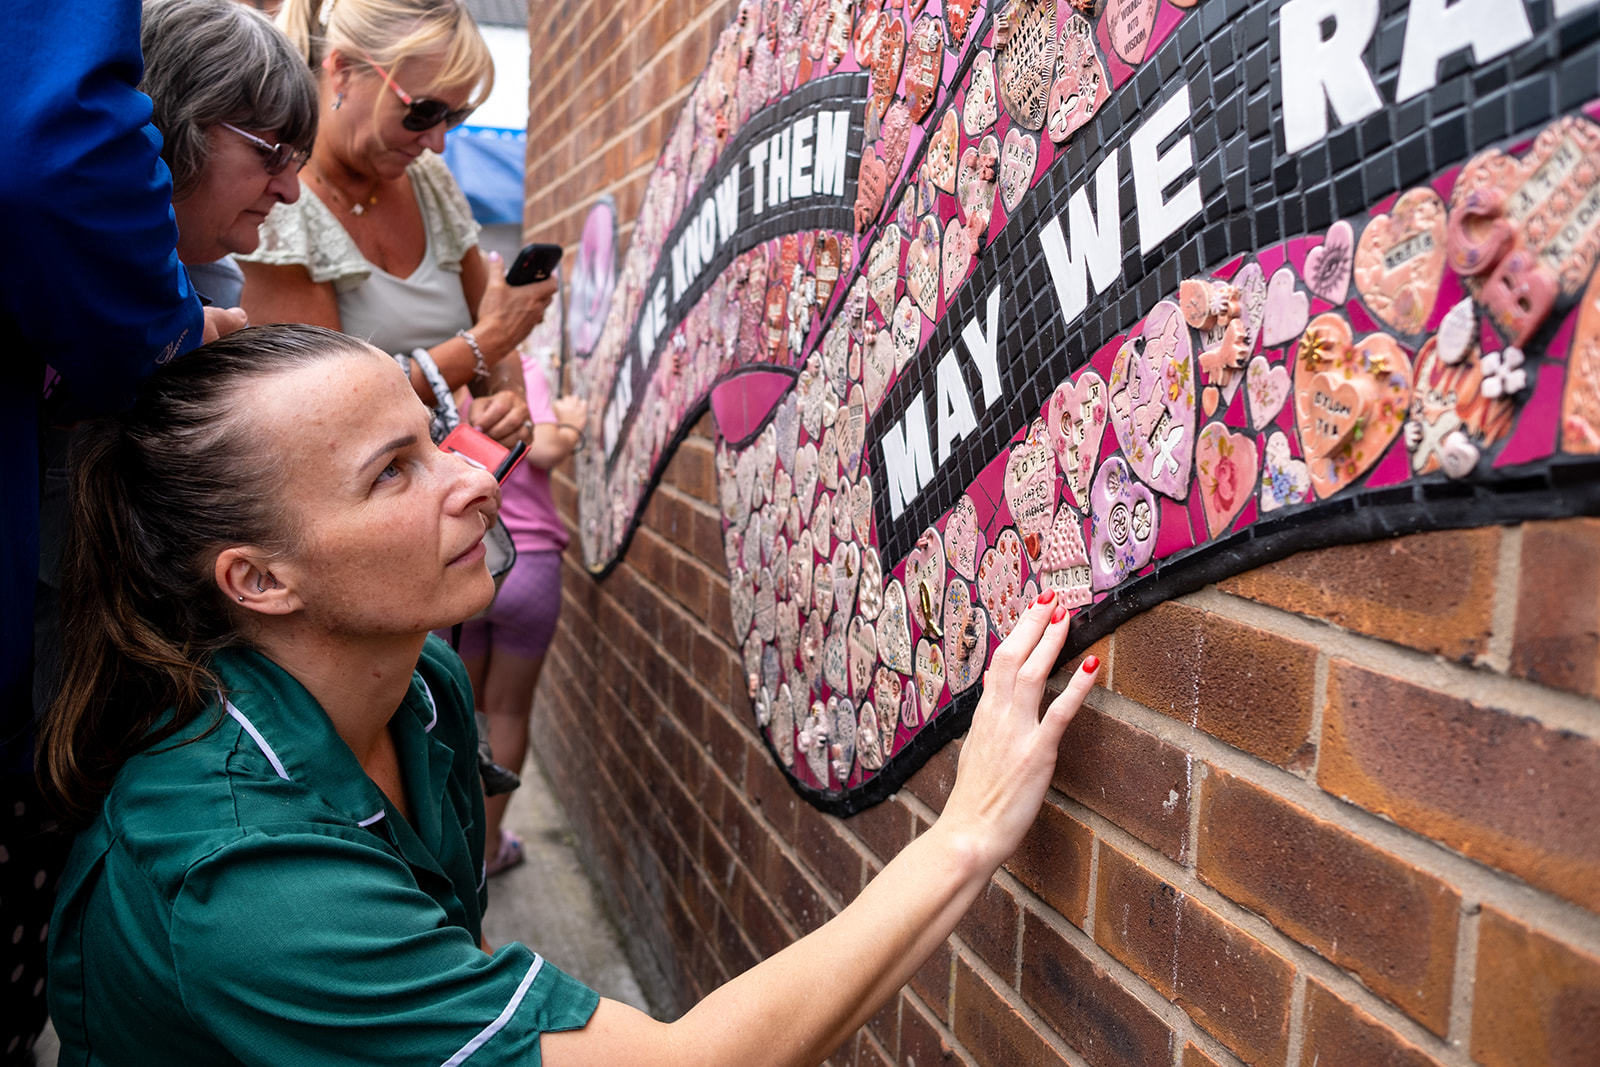 A woman in a nurse's uniform looks up close at the mosaic with one hand on it, her expression is thoughtful.